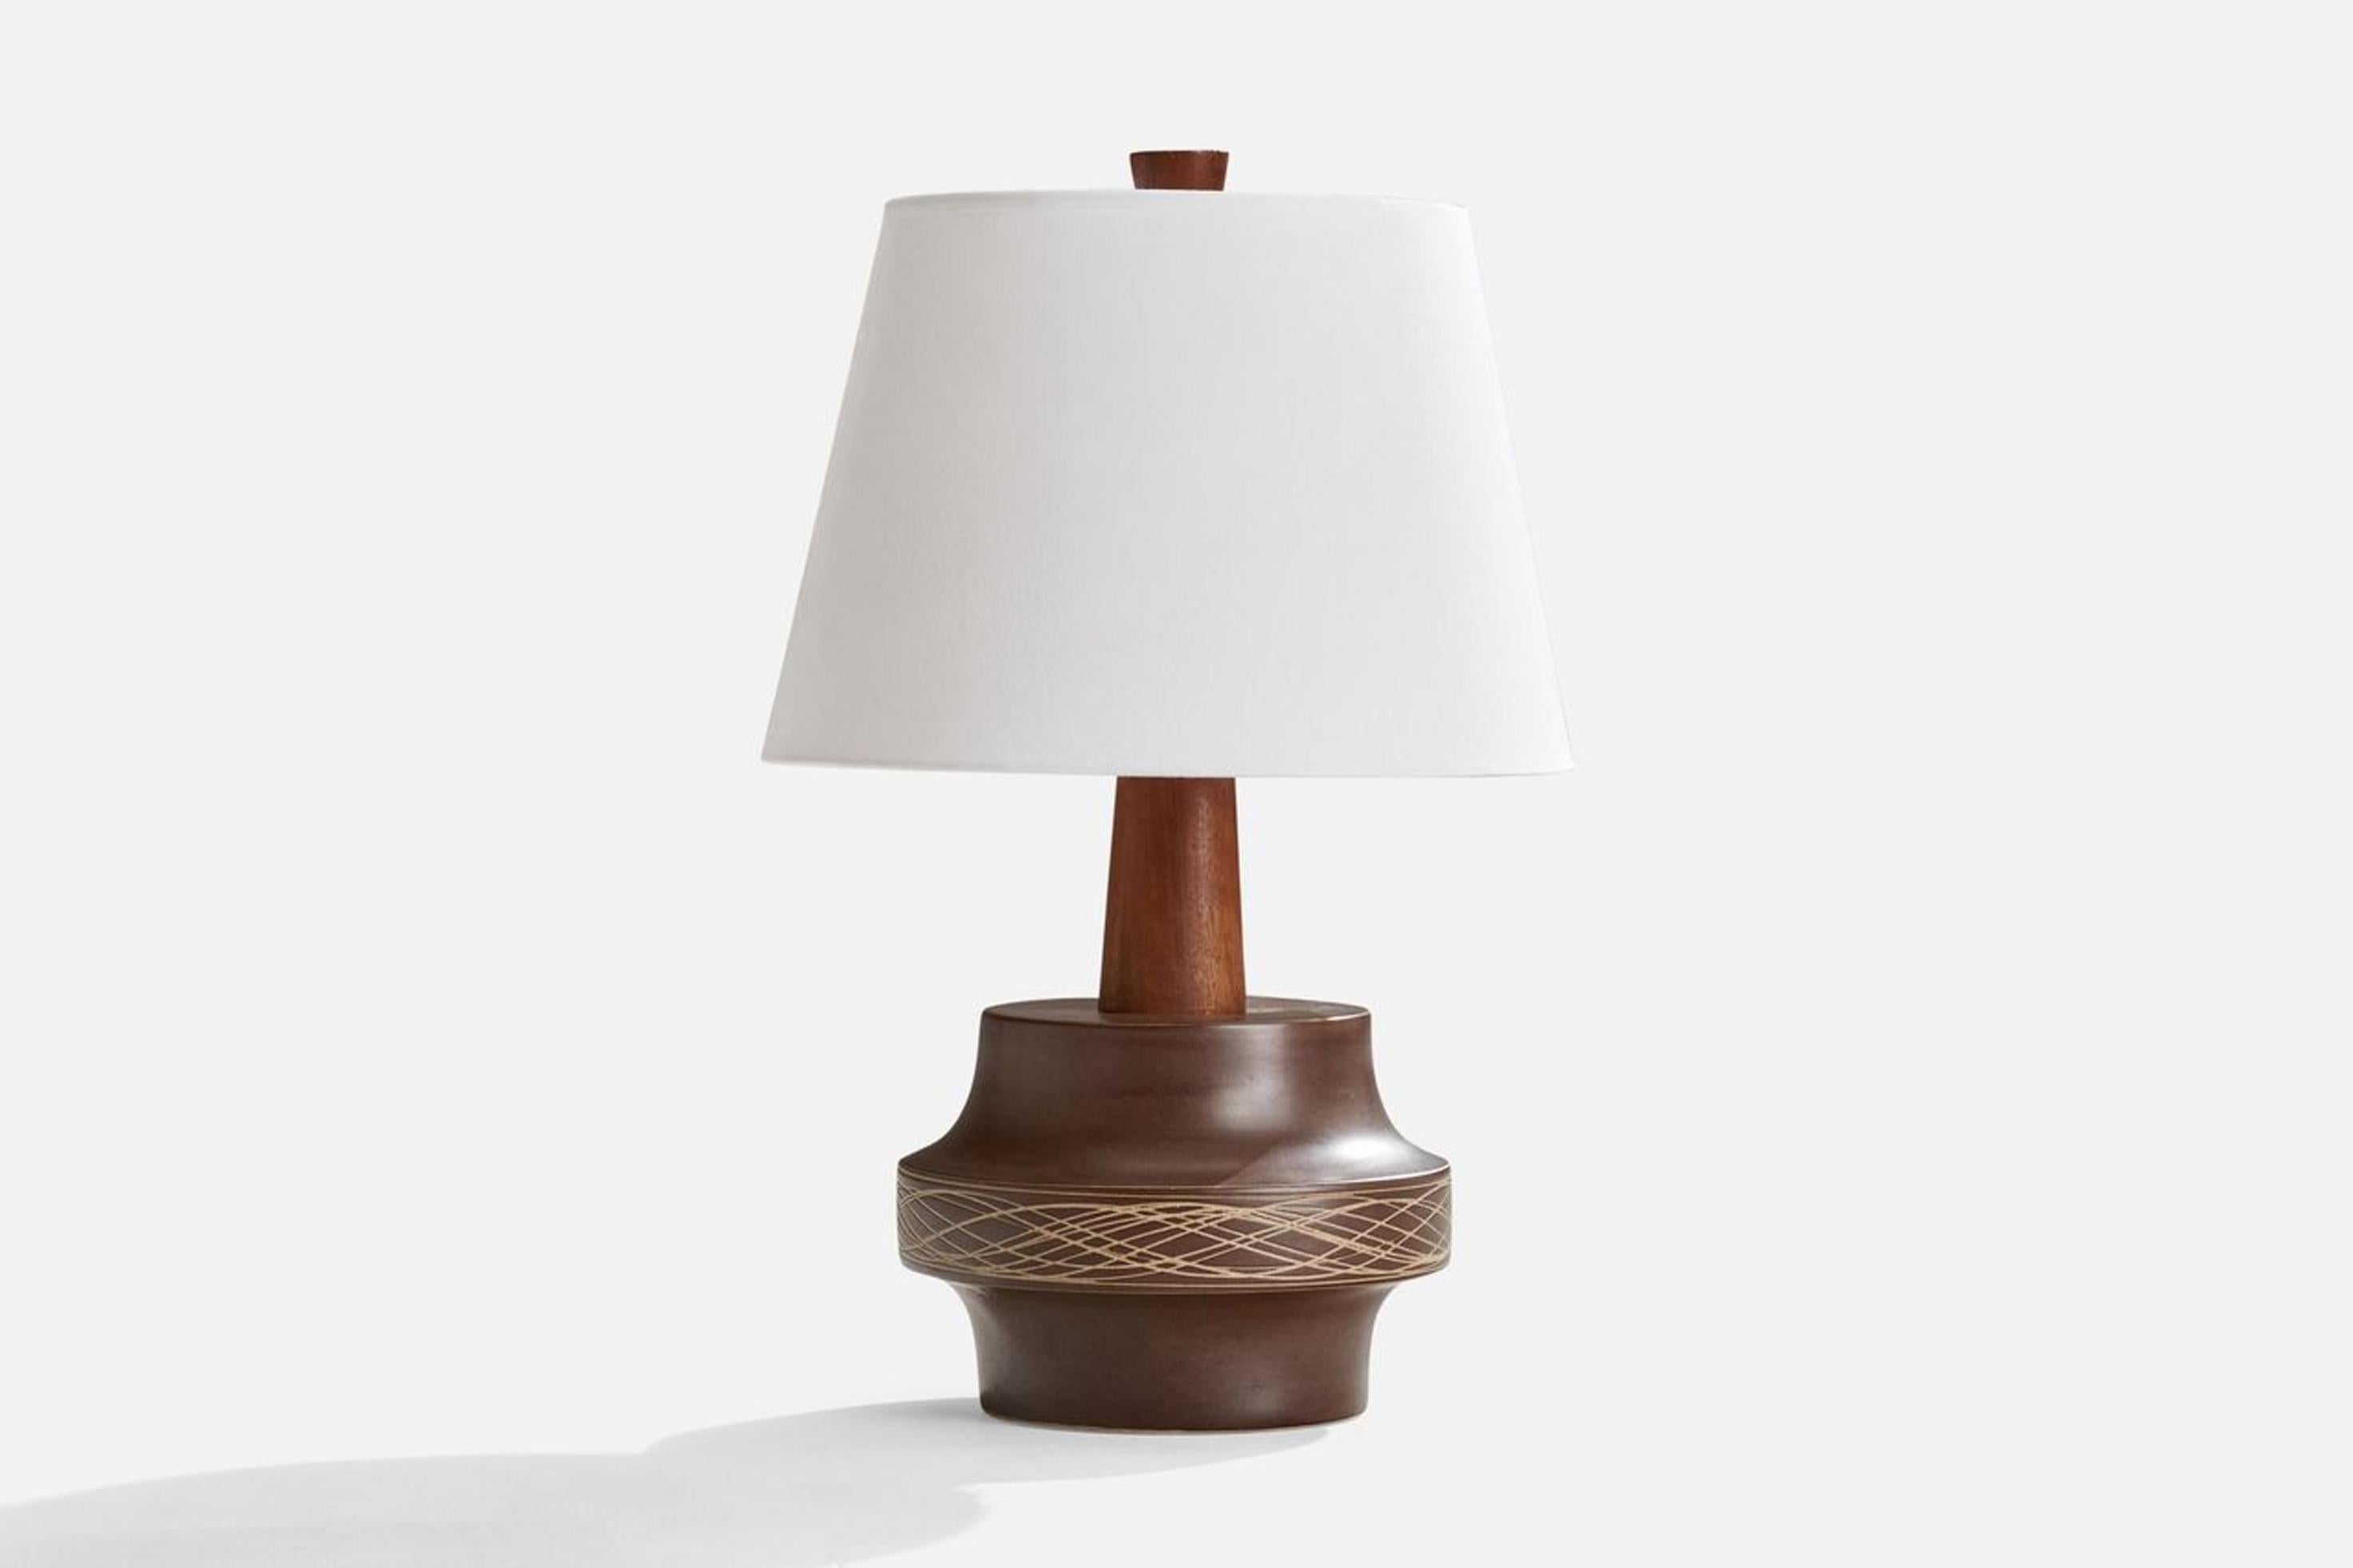 A brown-glazed ceramic and walnut table lamp designed by Jane & Gordon Martz and produced by Marshall Studios, USA, c. 1950s.

Dimensions of Lamp (inches): 14” H x 10” Diameter
Dimensions of Shade (inches): 10